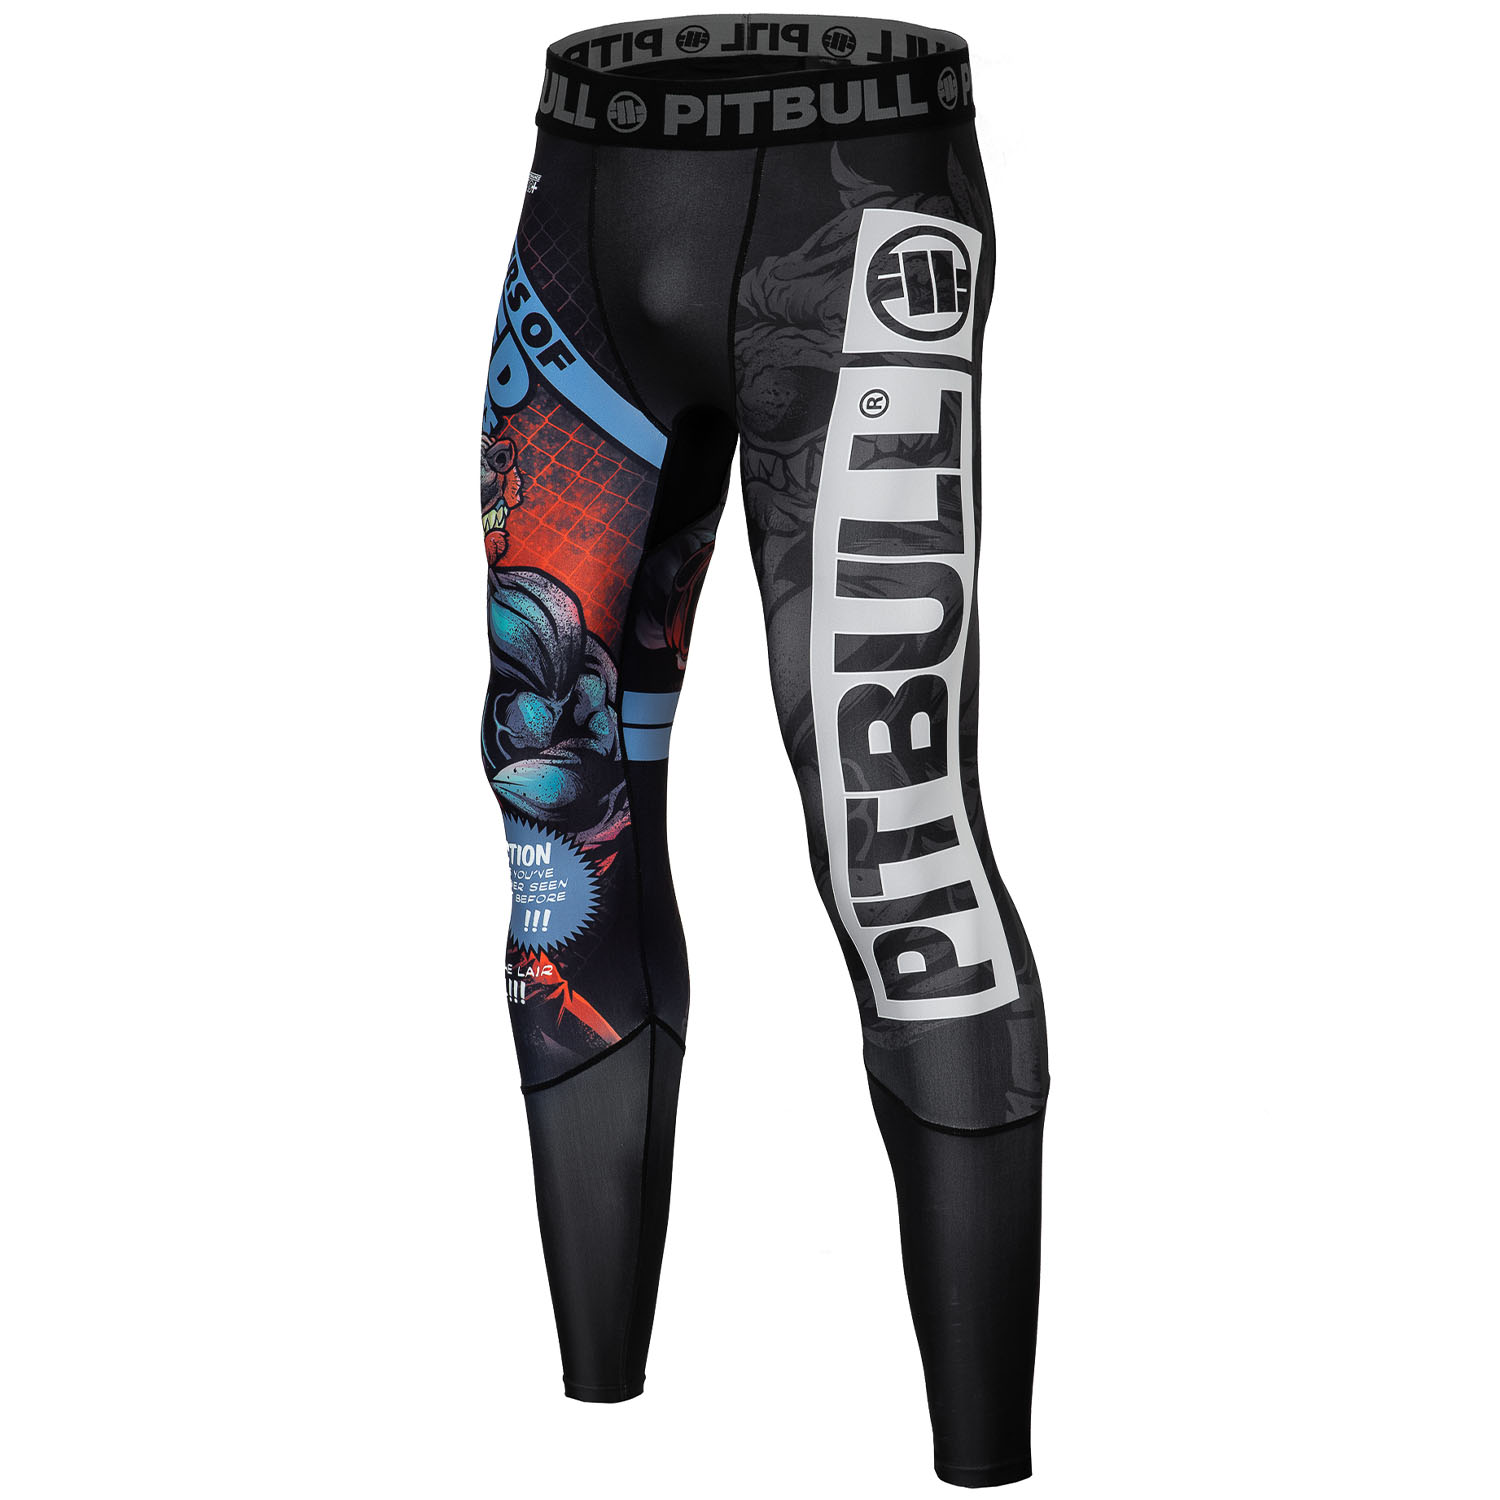 Pit Bull West Coast Compression Pants, Masters Of MMA, black, S